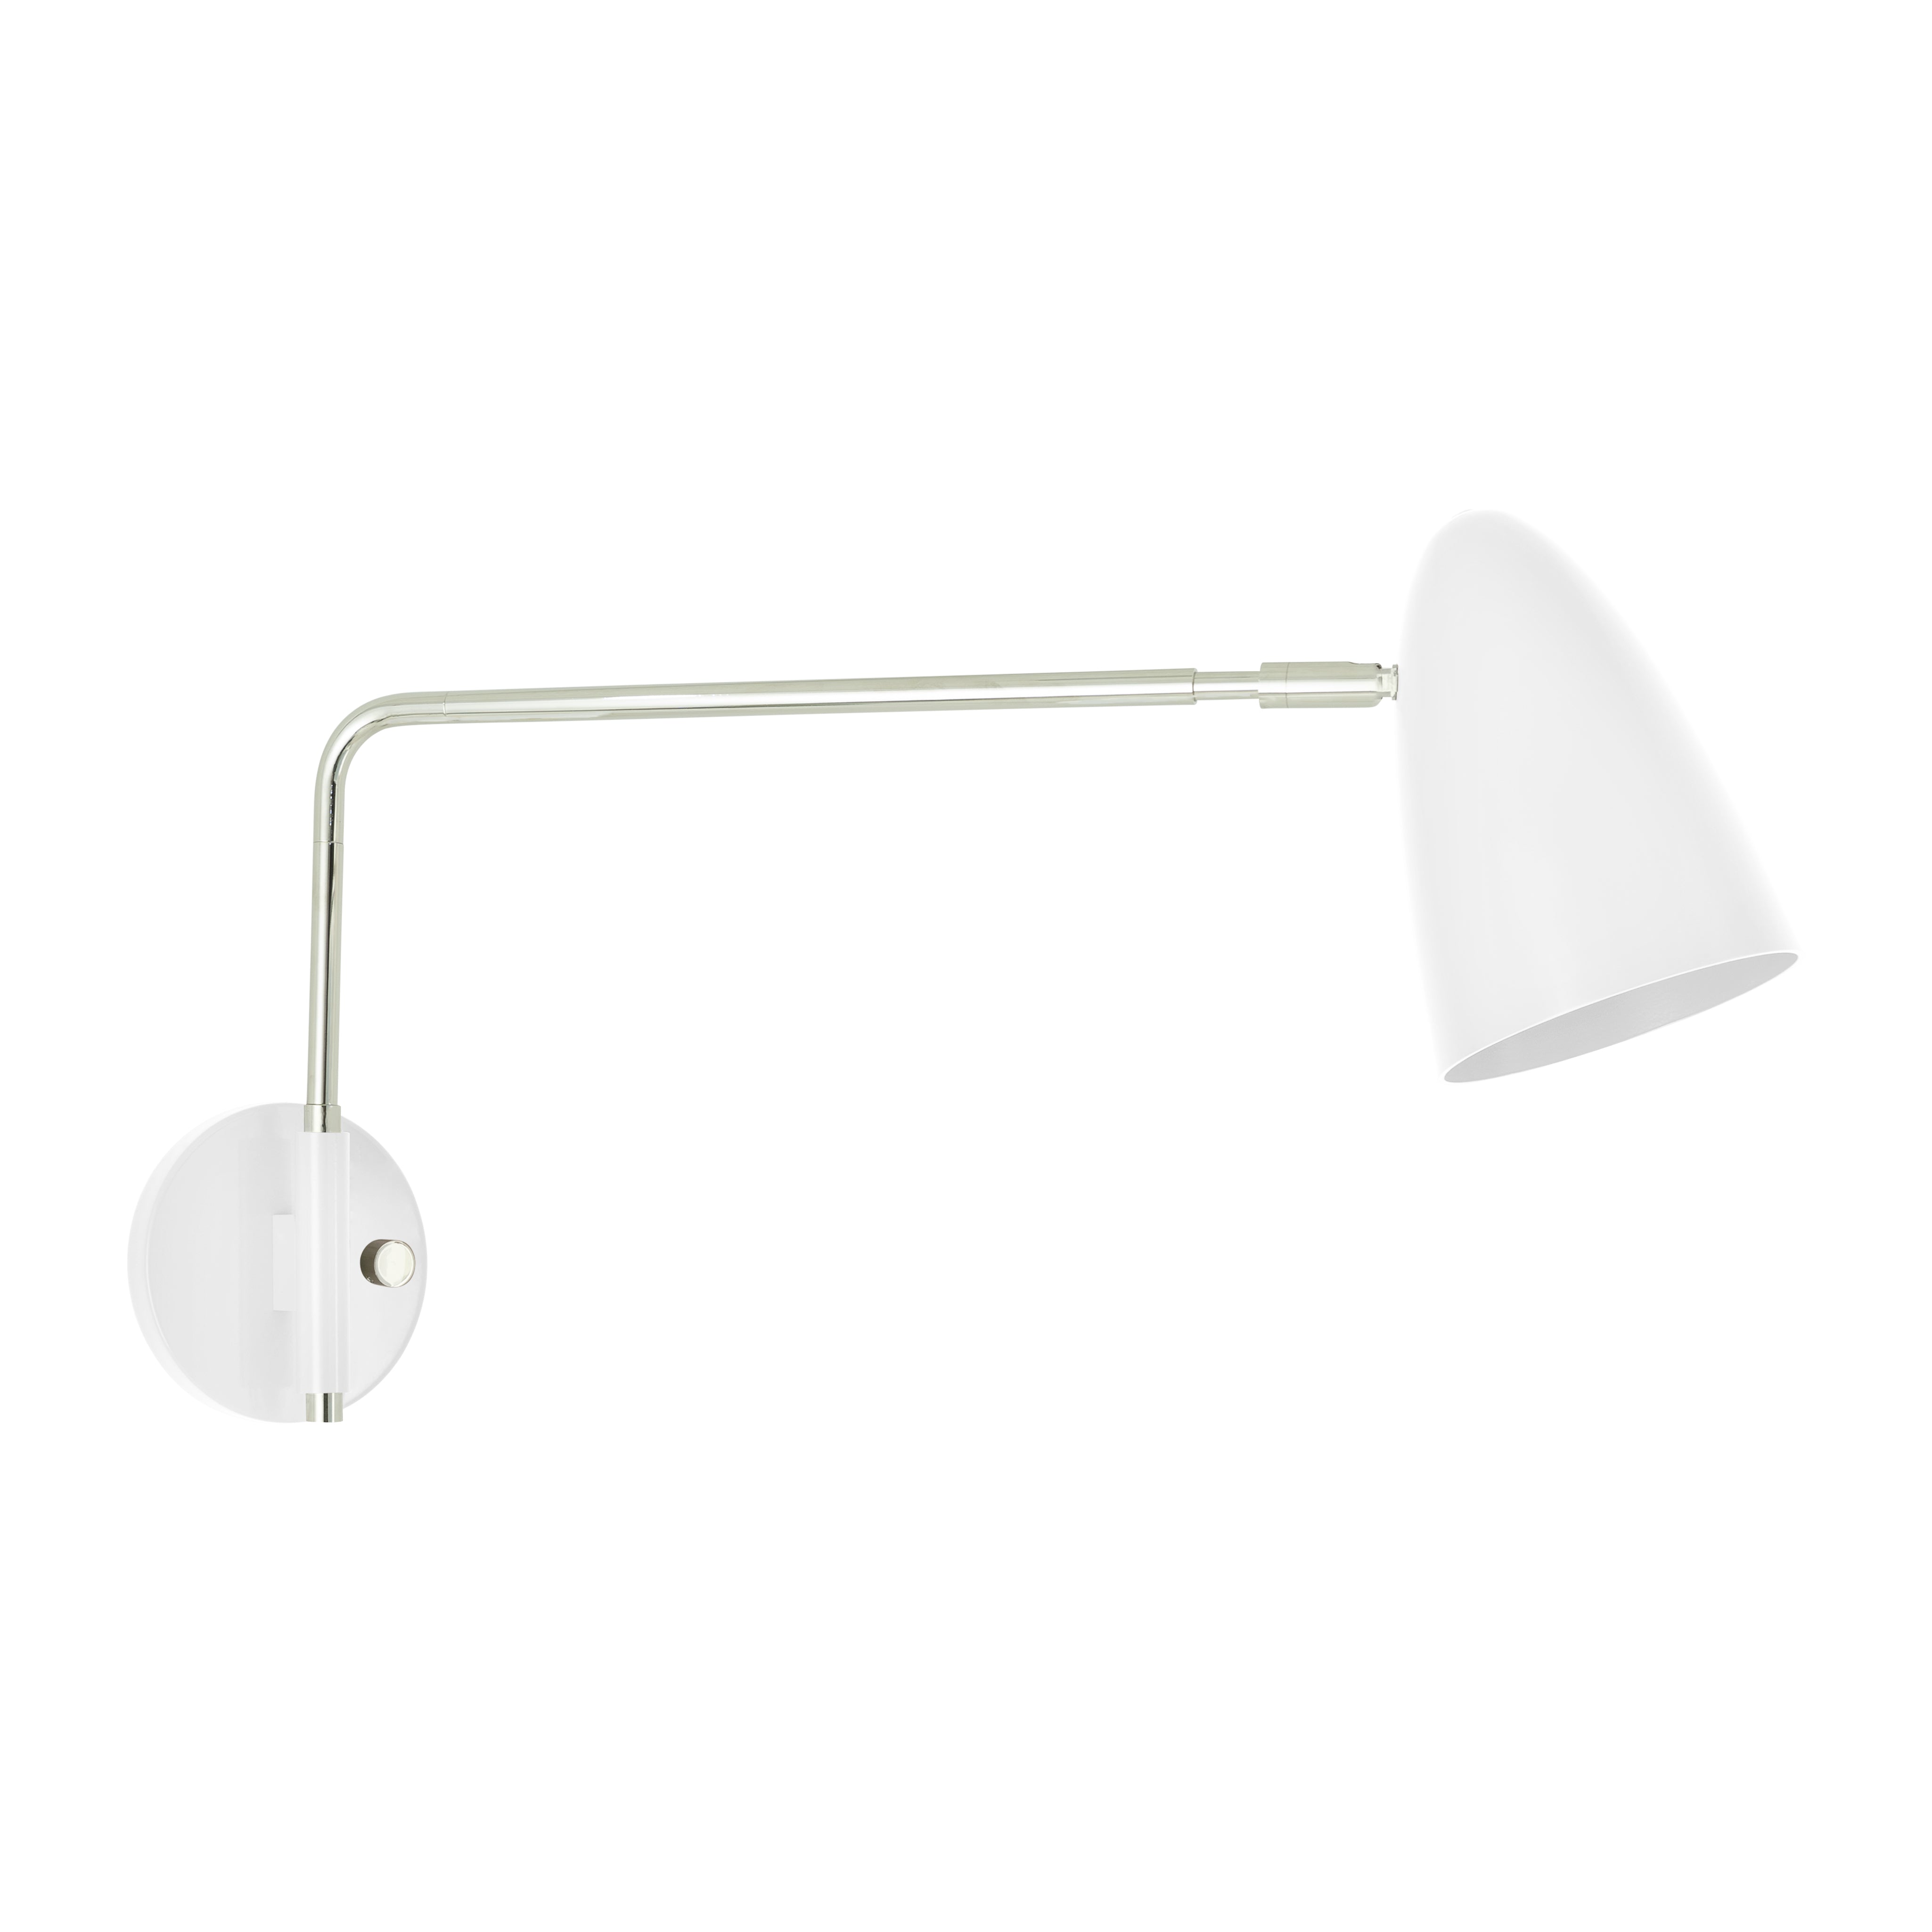 Nickel and white color Boom Swing Arm sconce Dutton Brown lighting